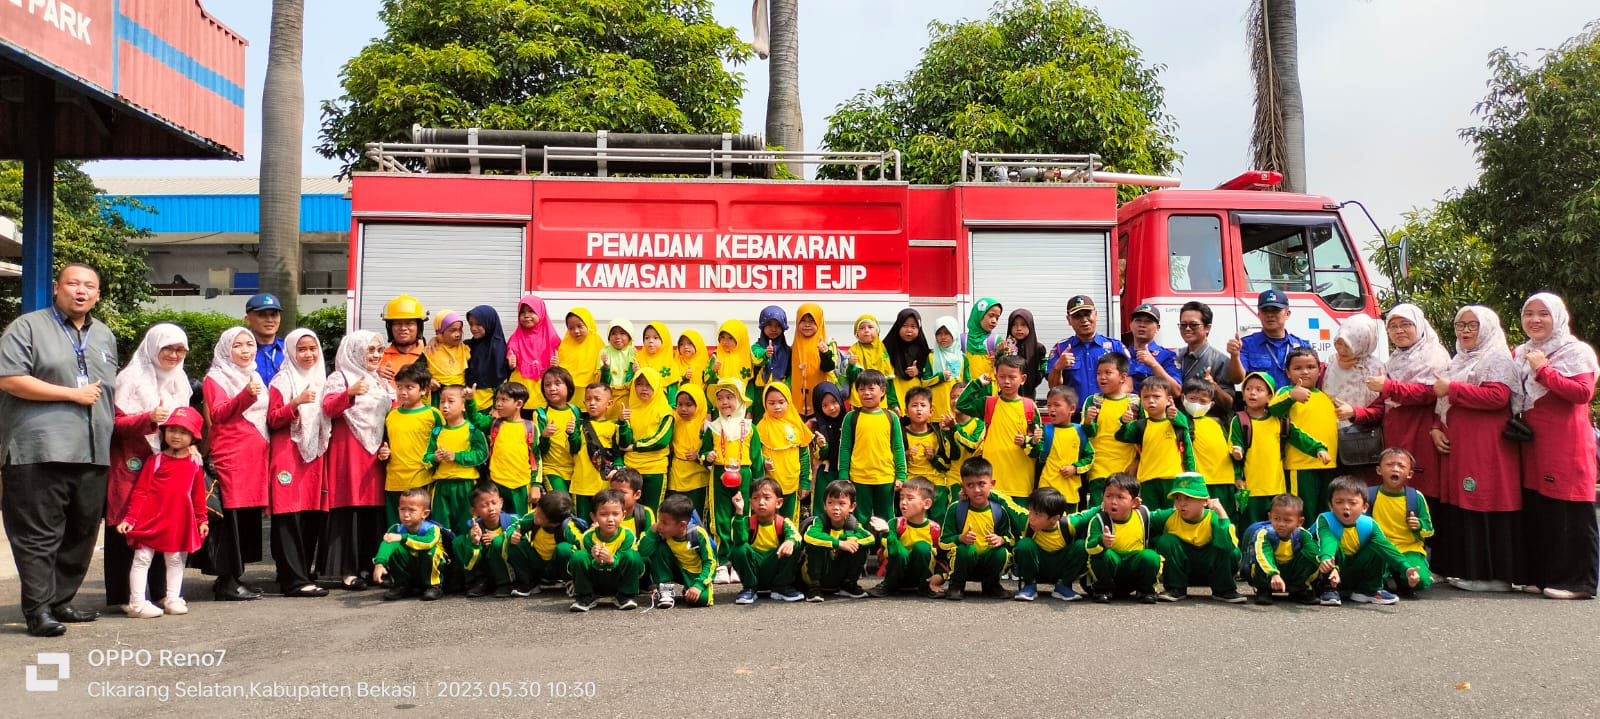 CSR Activity Report: Visit to EJIP Fire Department by TK Ansori Perum Mega Regency Students